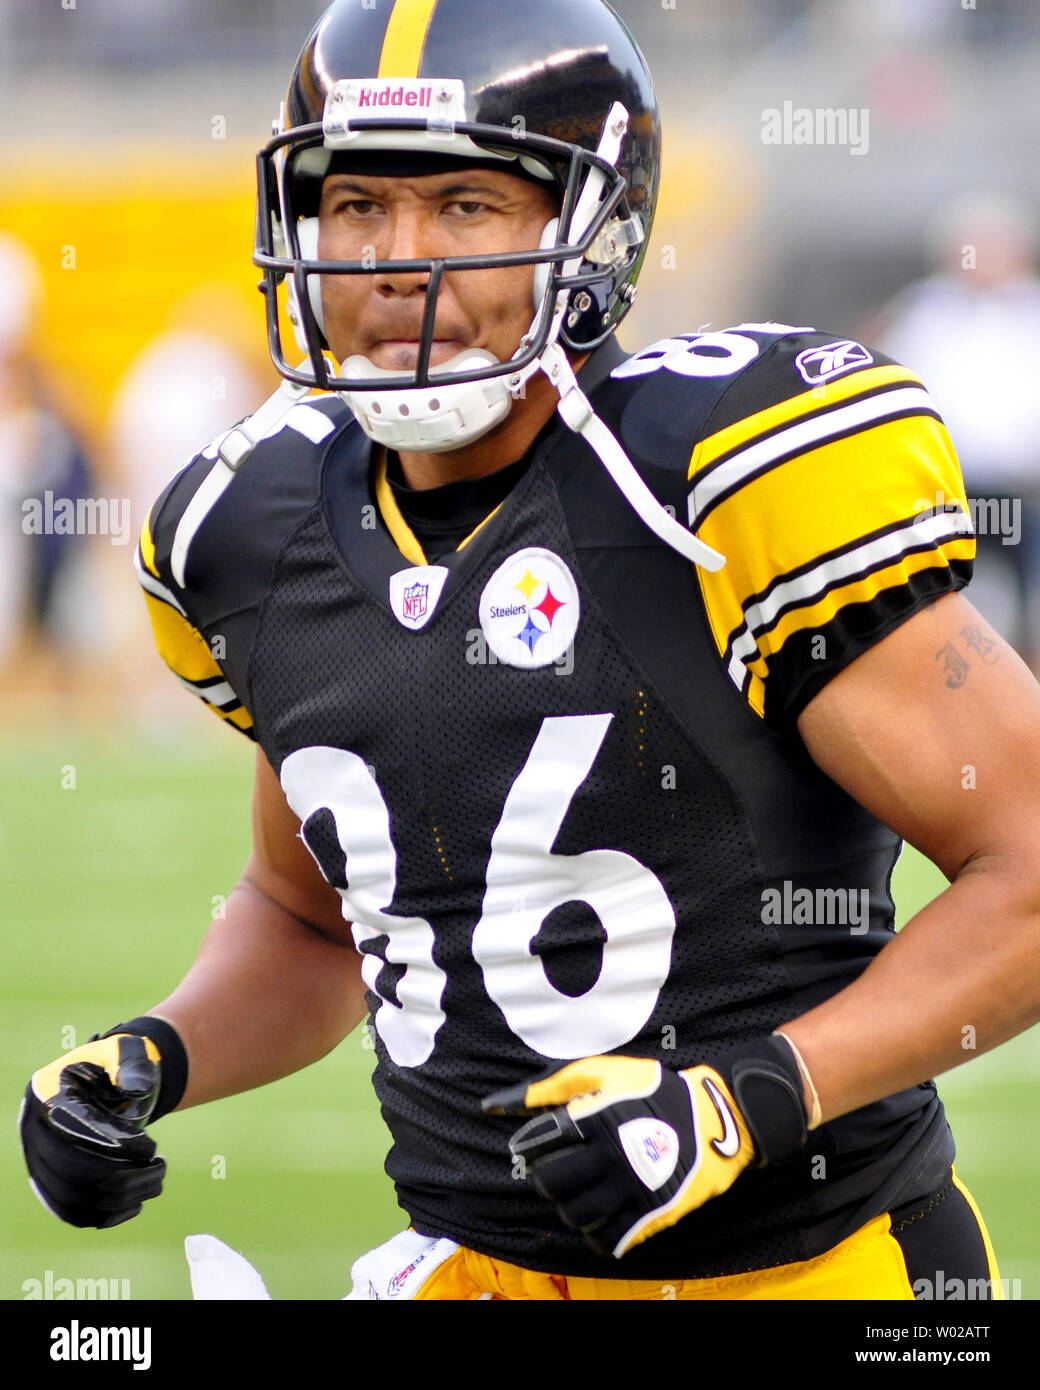 Pittsburgh Steelers Hines Ward warms up before the start of the preseason game against the Atlanta Falcons at Heinz Field in Pittsburgh PA on August 27, 2011. UPI/Archie Carpenter Stock Photo